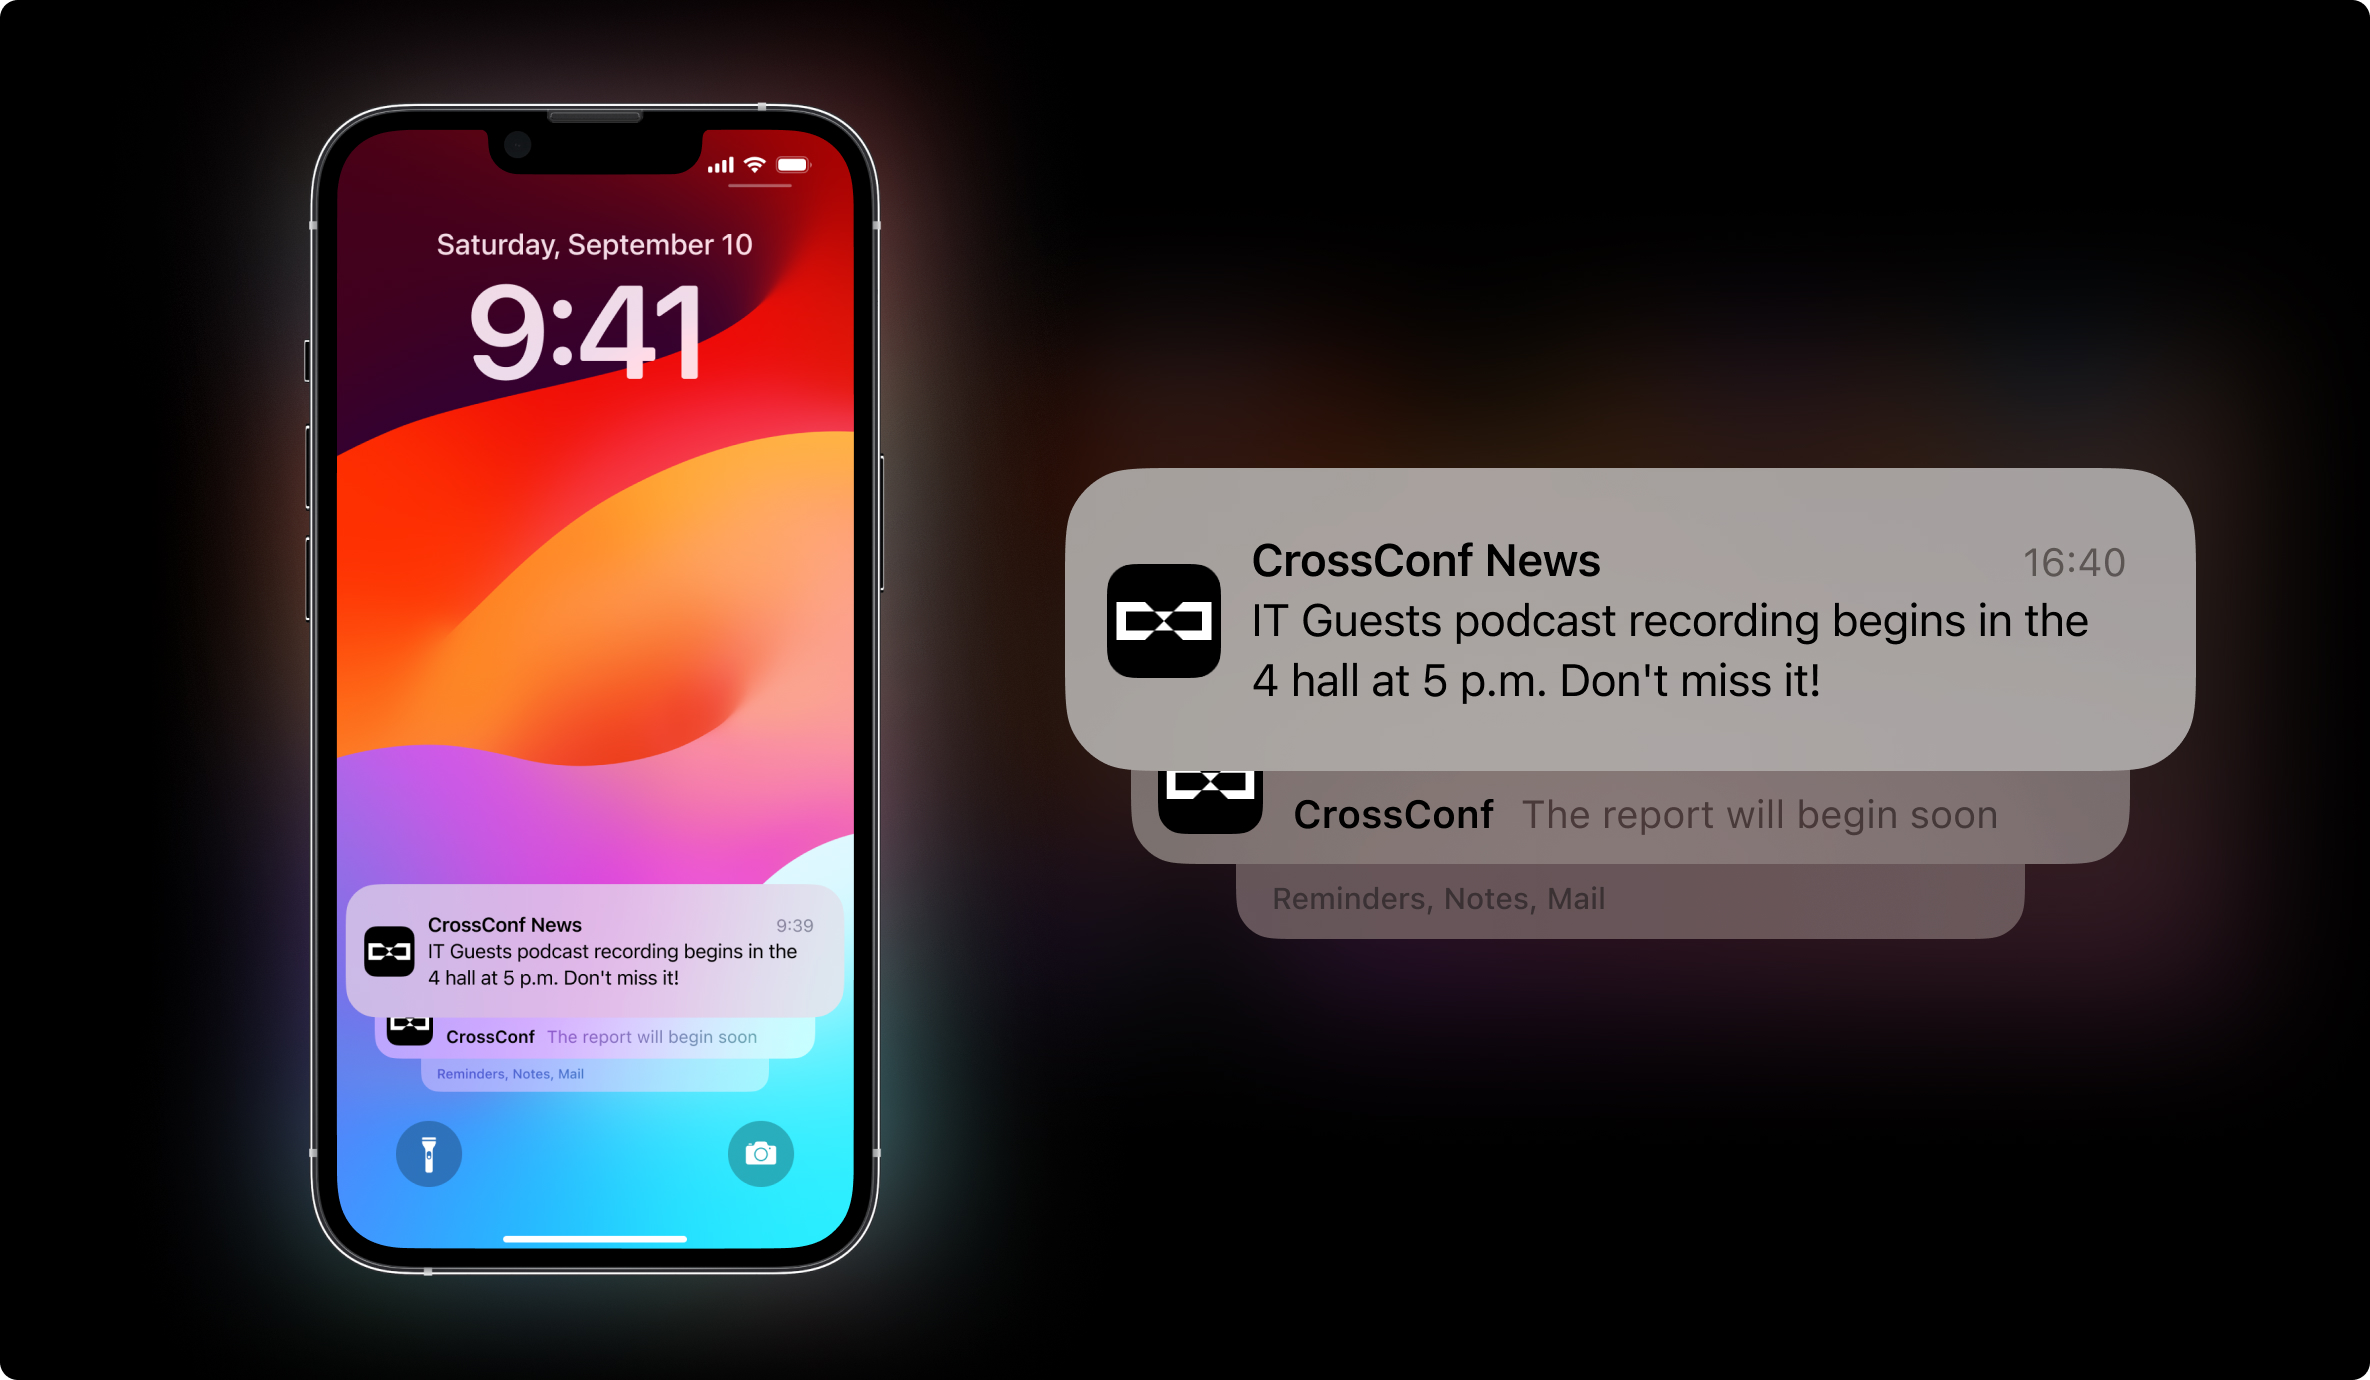 Push notifications reduce the risk of forgetting about an event.